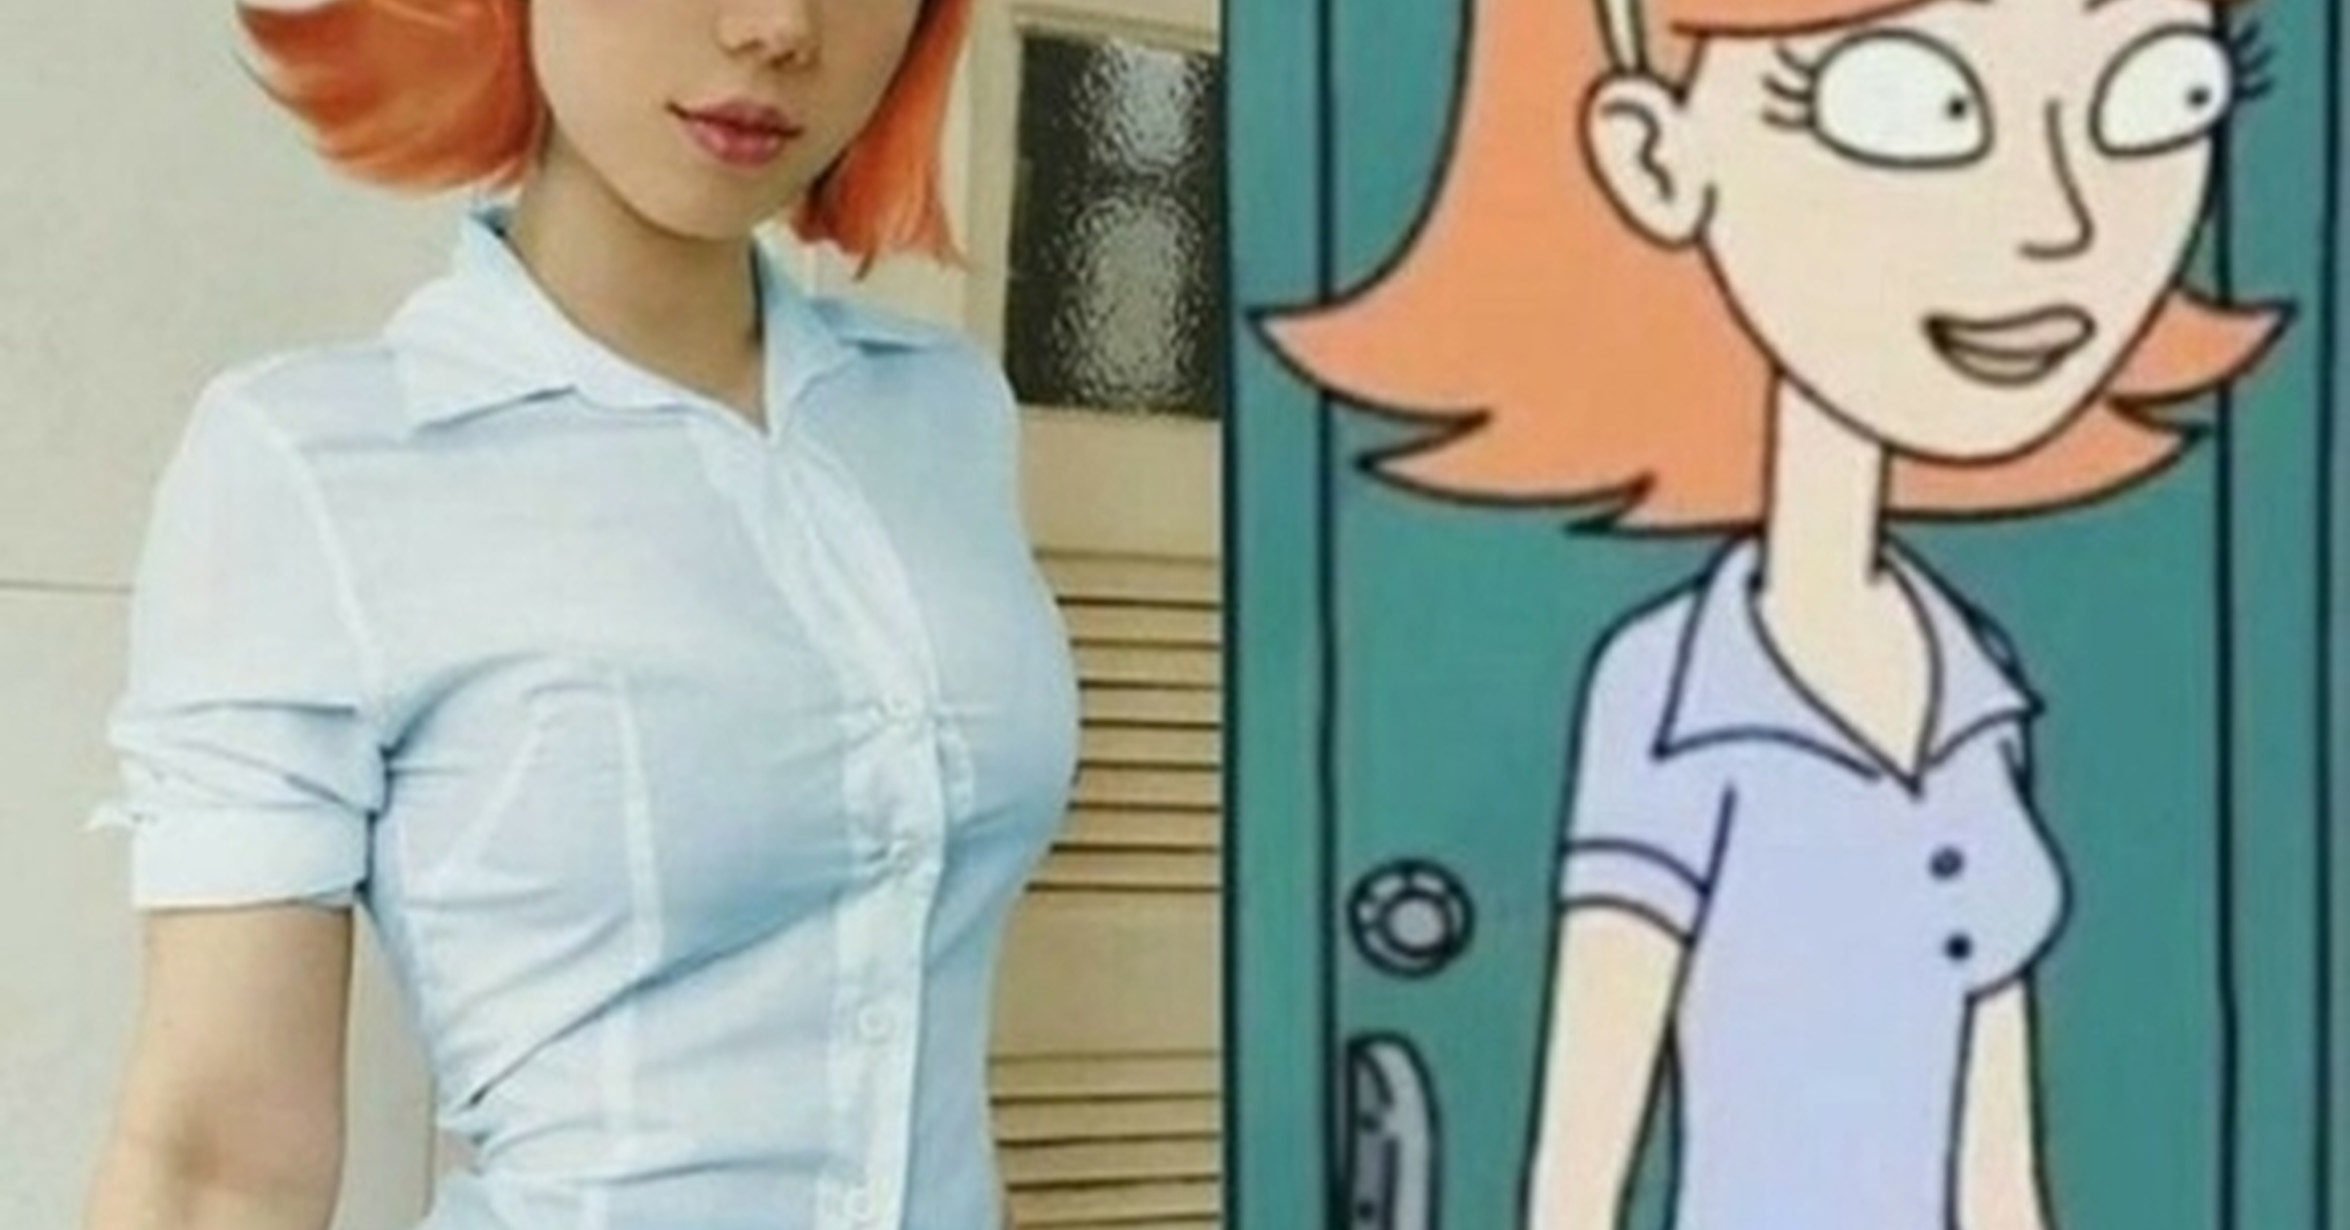 Rick morty porn parody updated breasts